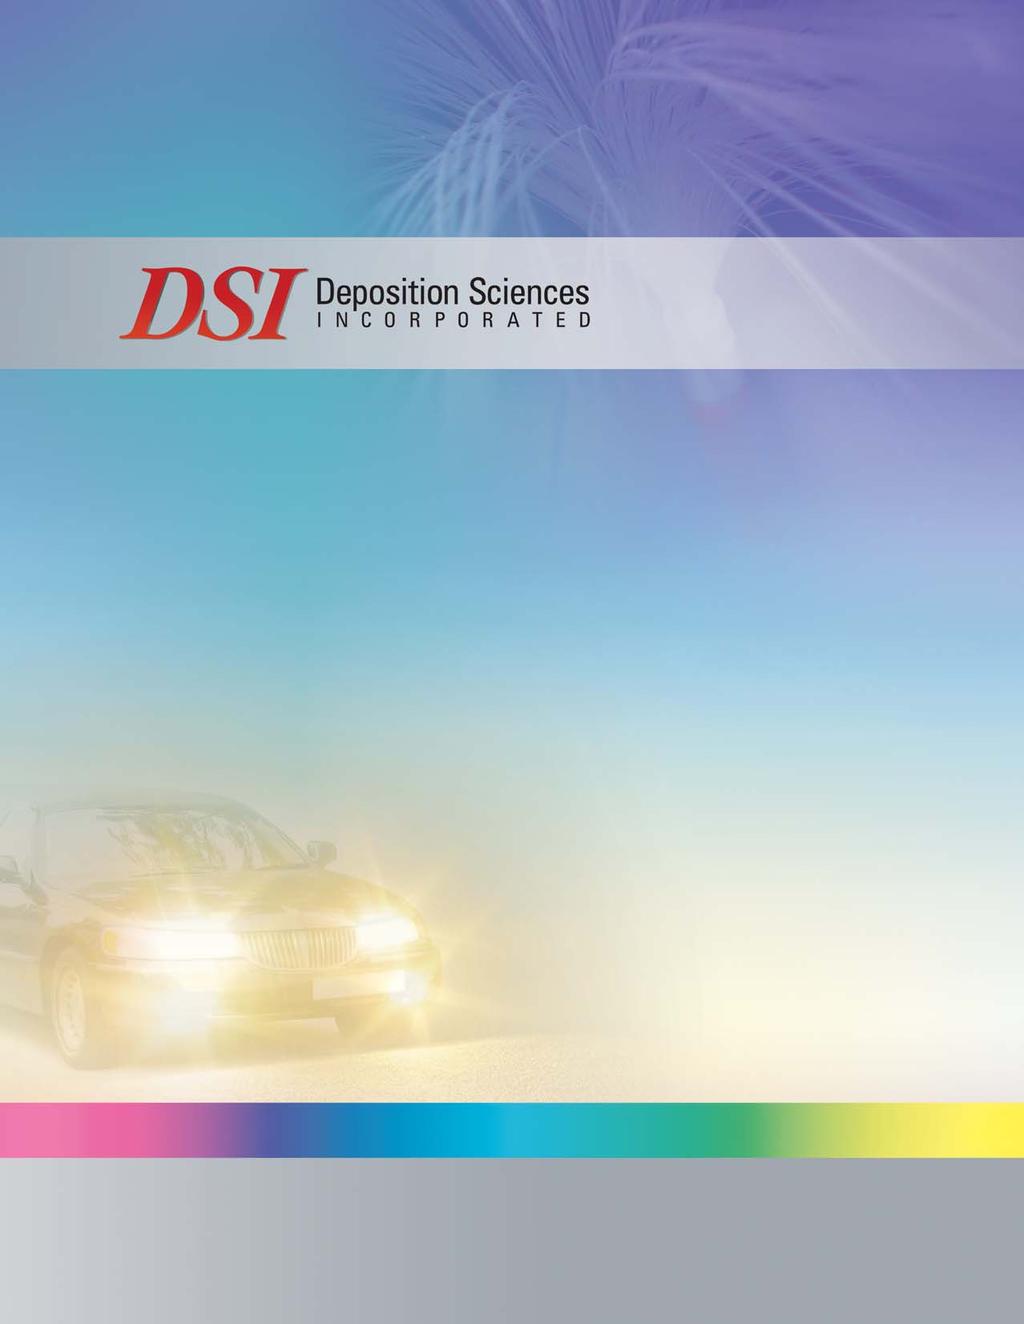 COMMERCIAL PRODUCTS GROUP Into the Future DSI was established in 1985 with a contract to develop an energy-efficient coating for halogen light bulbs.